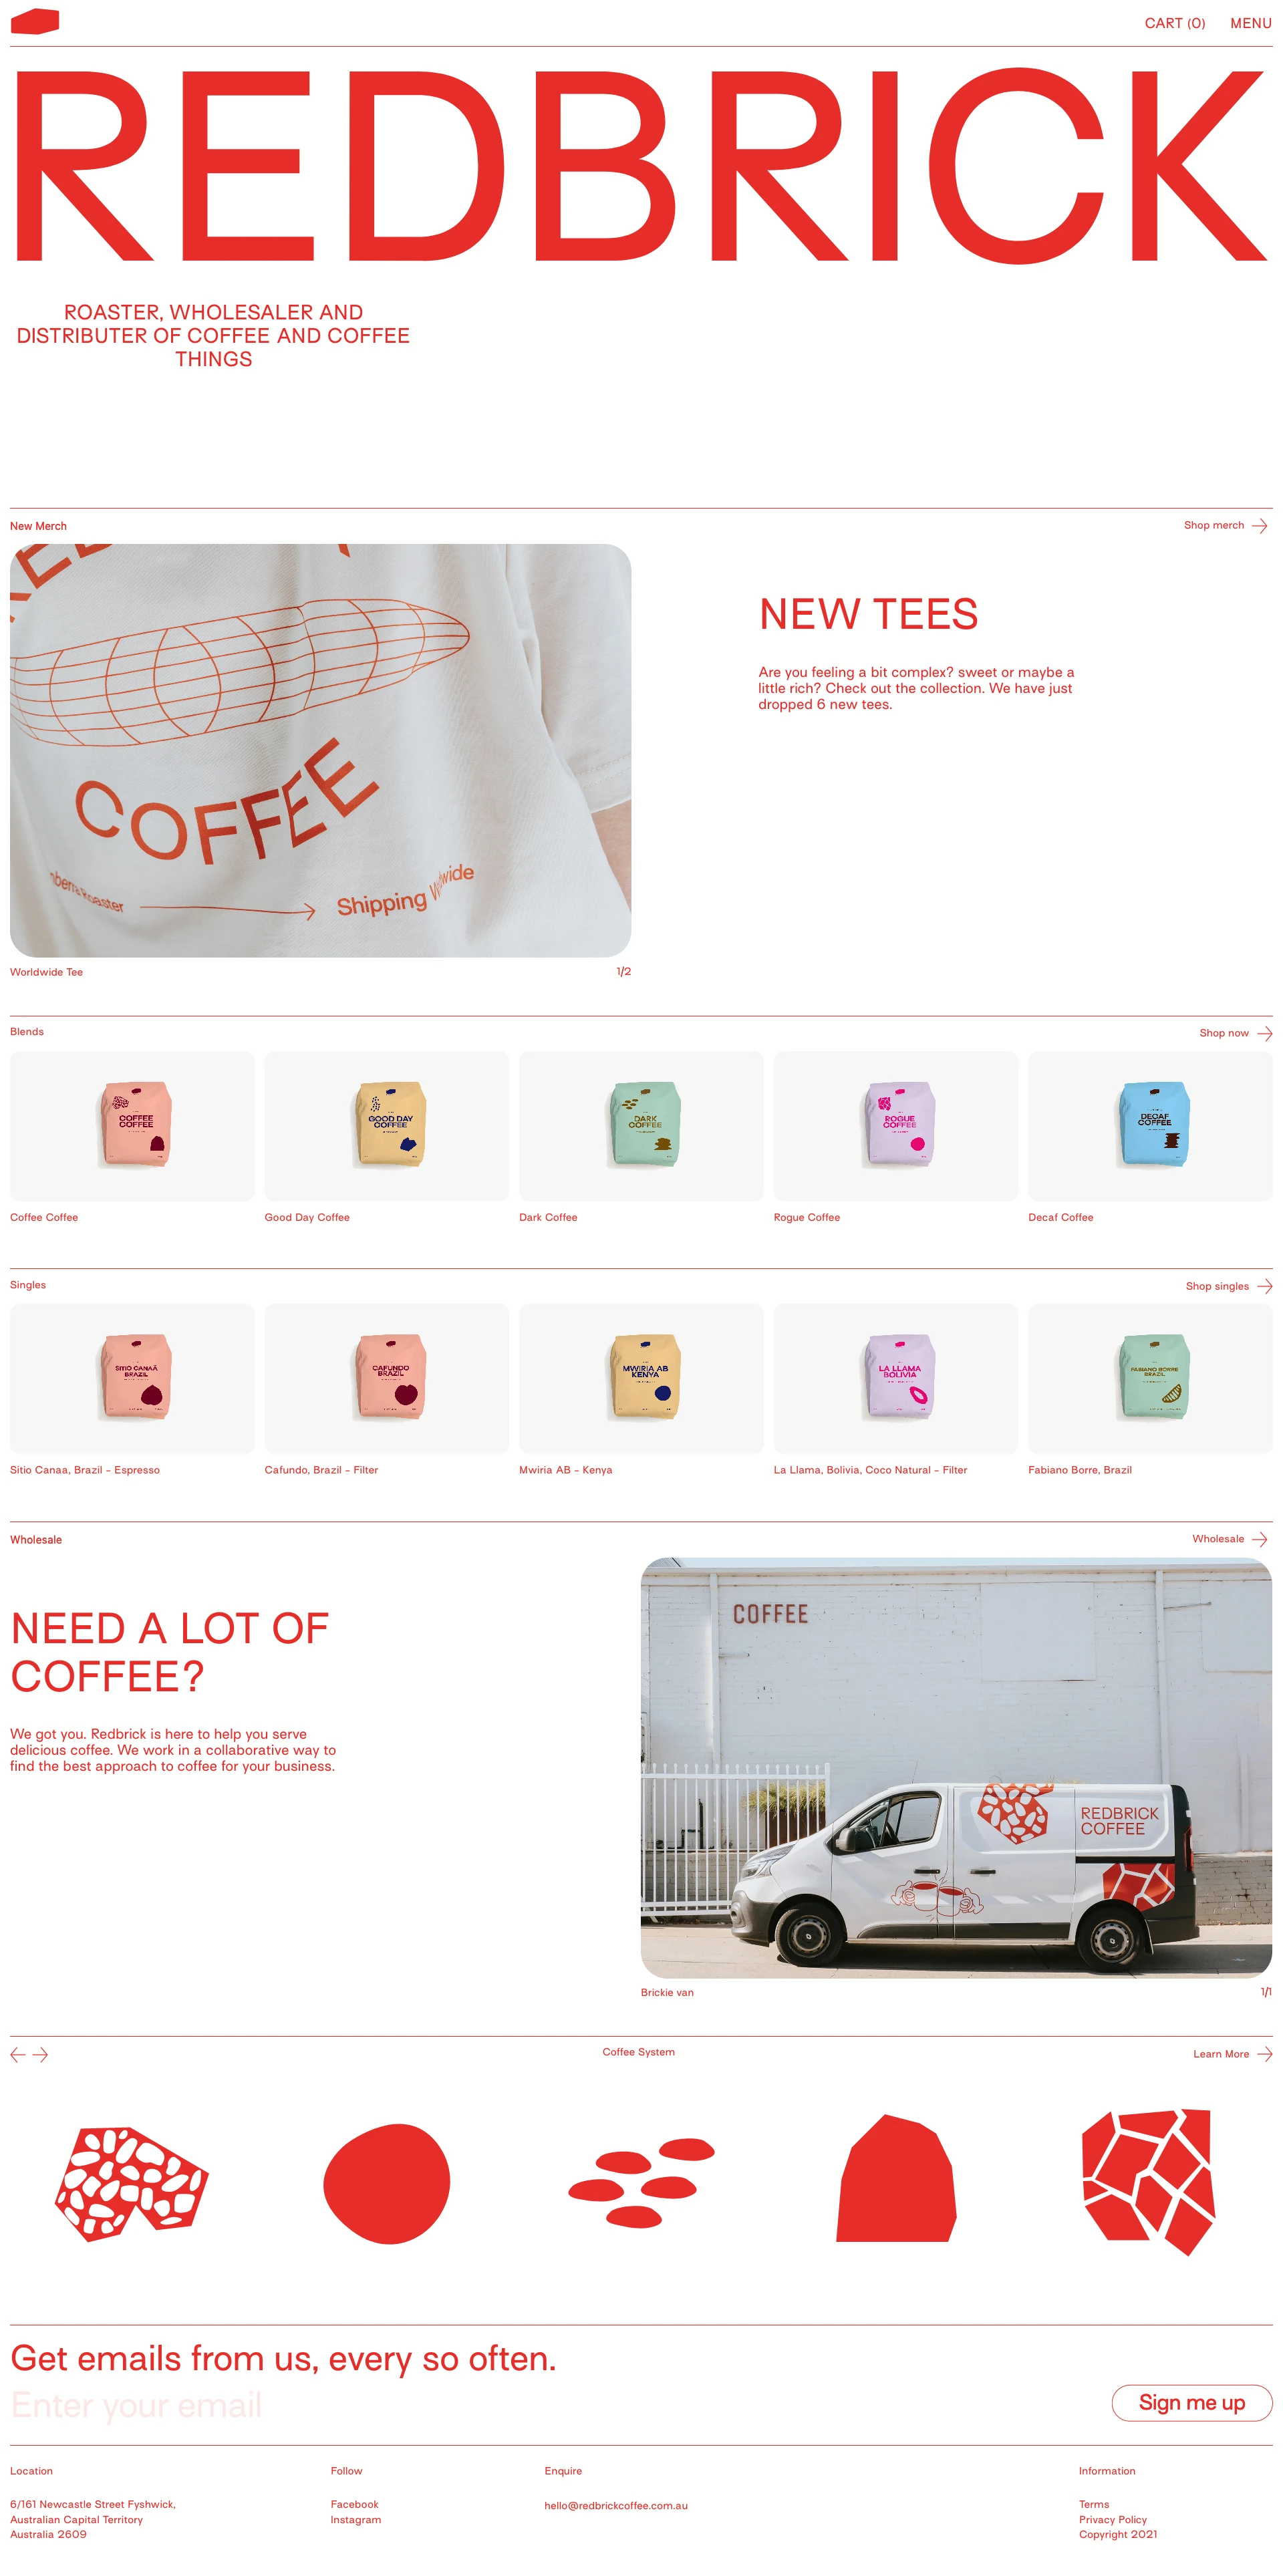 Redbrick Landing Page Example: Roaster, wholesaler and distributer of coffee and coffee things.